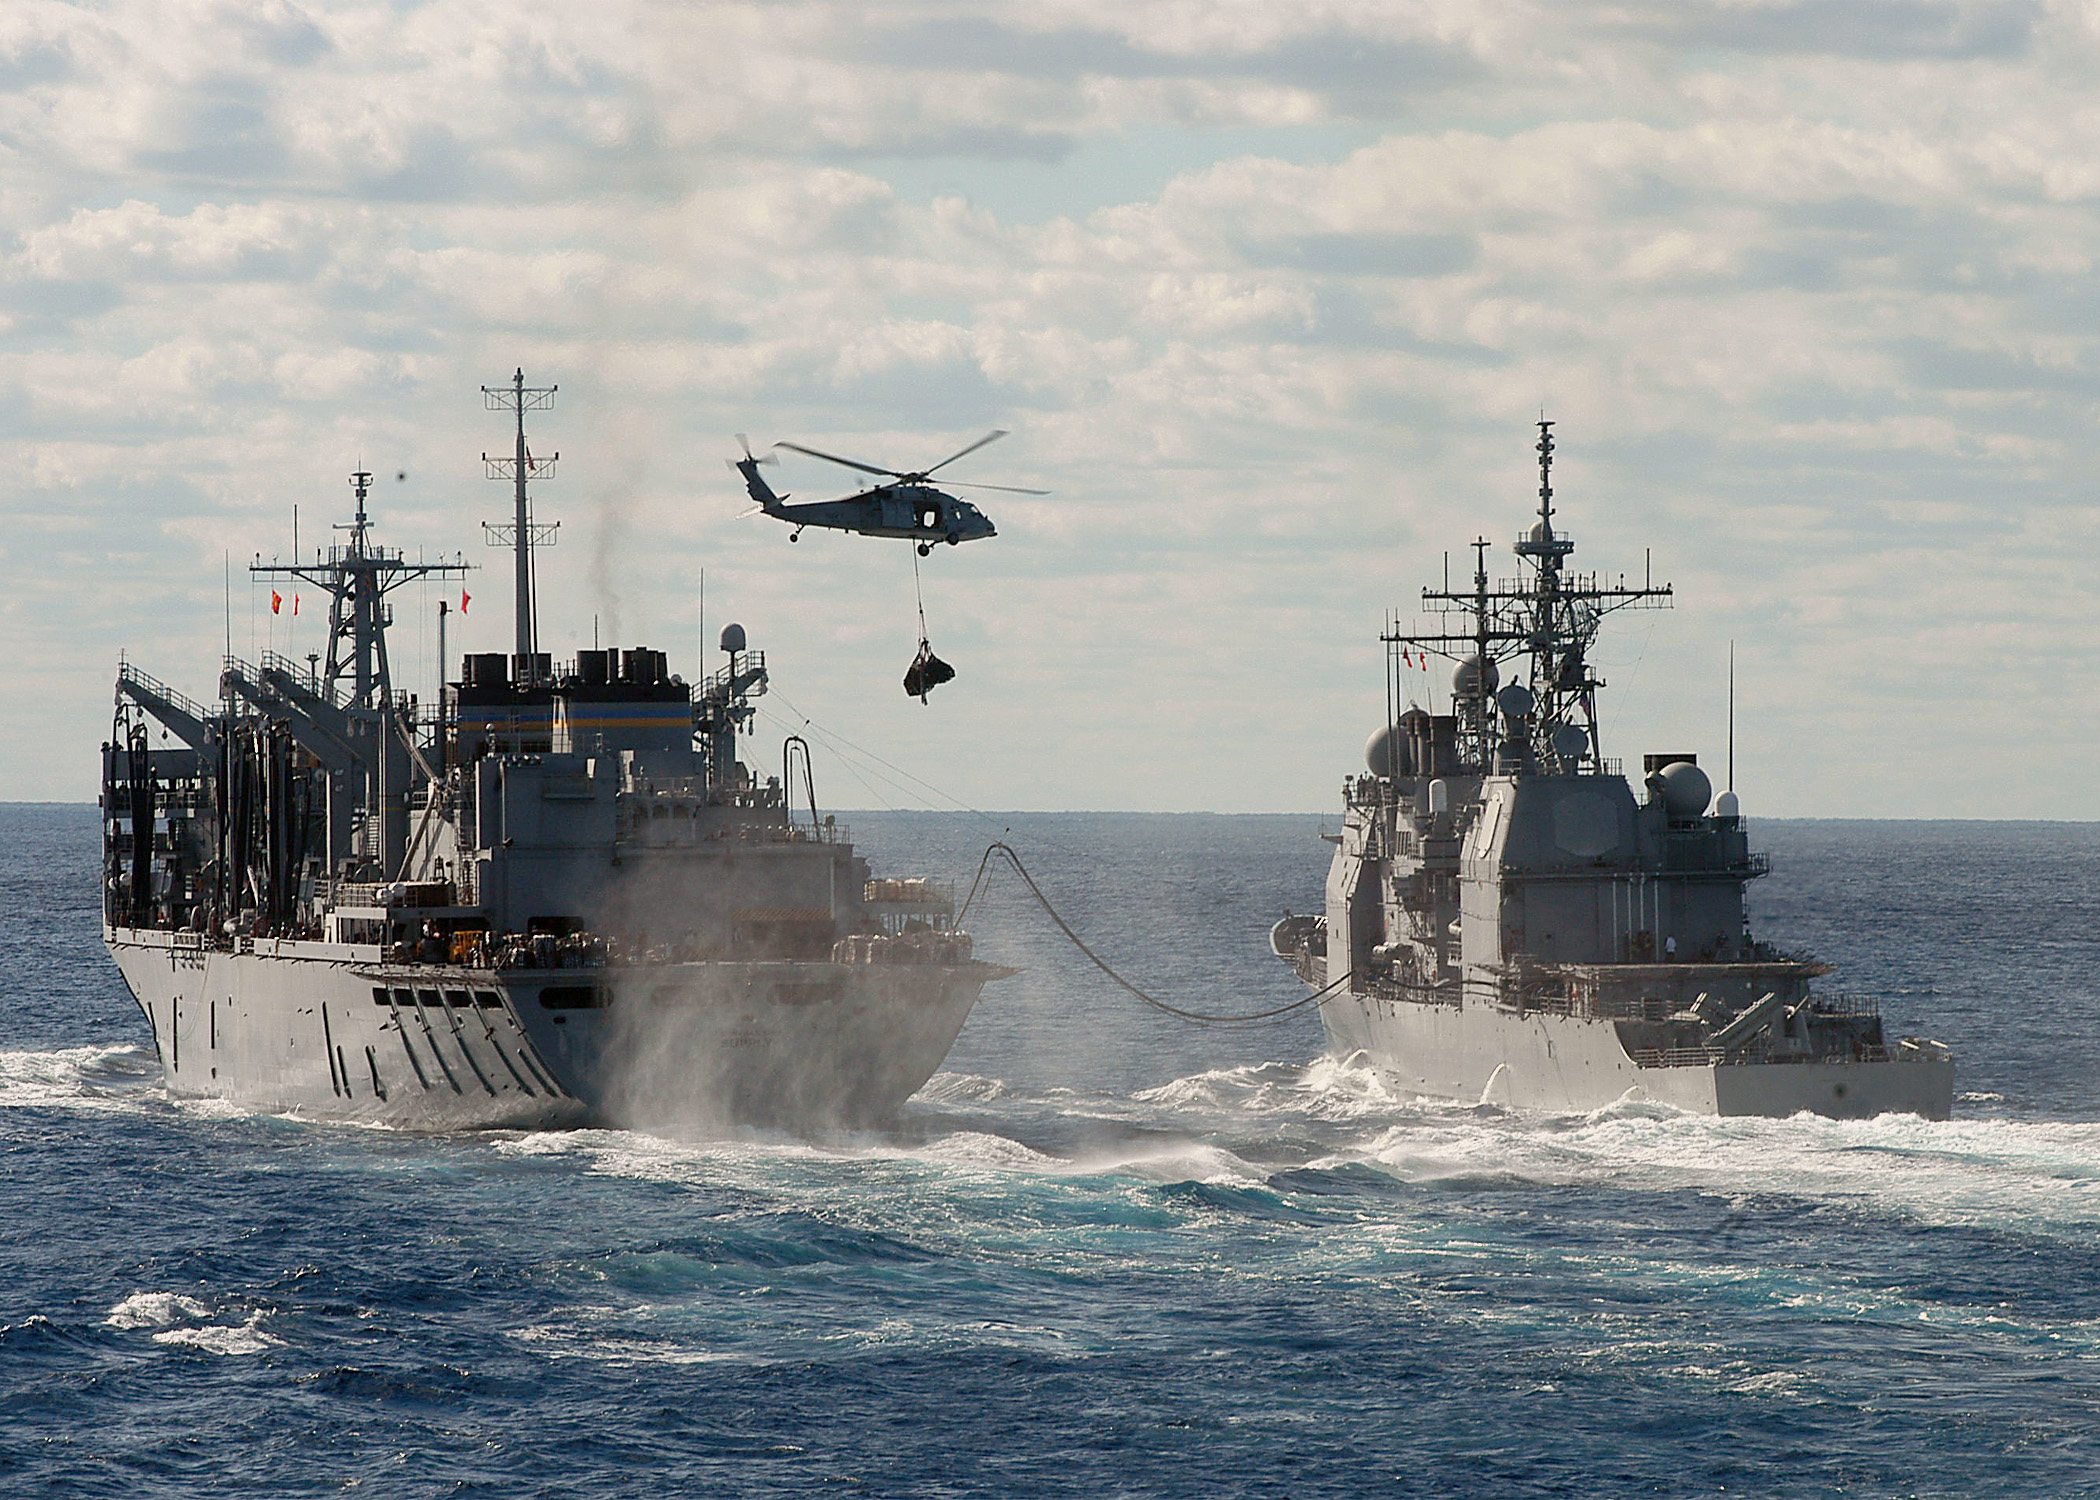 US_Navy_031121-N-8213G-002_The_Military_Sealift_Command_ship_USNS_Supply_%28T-AOE_6%29_conducts_a_refueling_at_sea_and_vertical_replenishment_at_sea.jpg